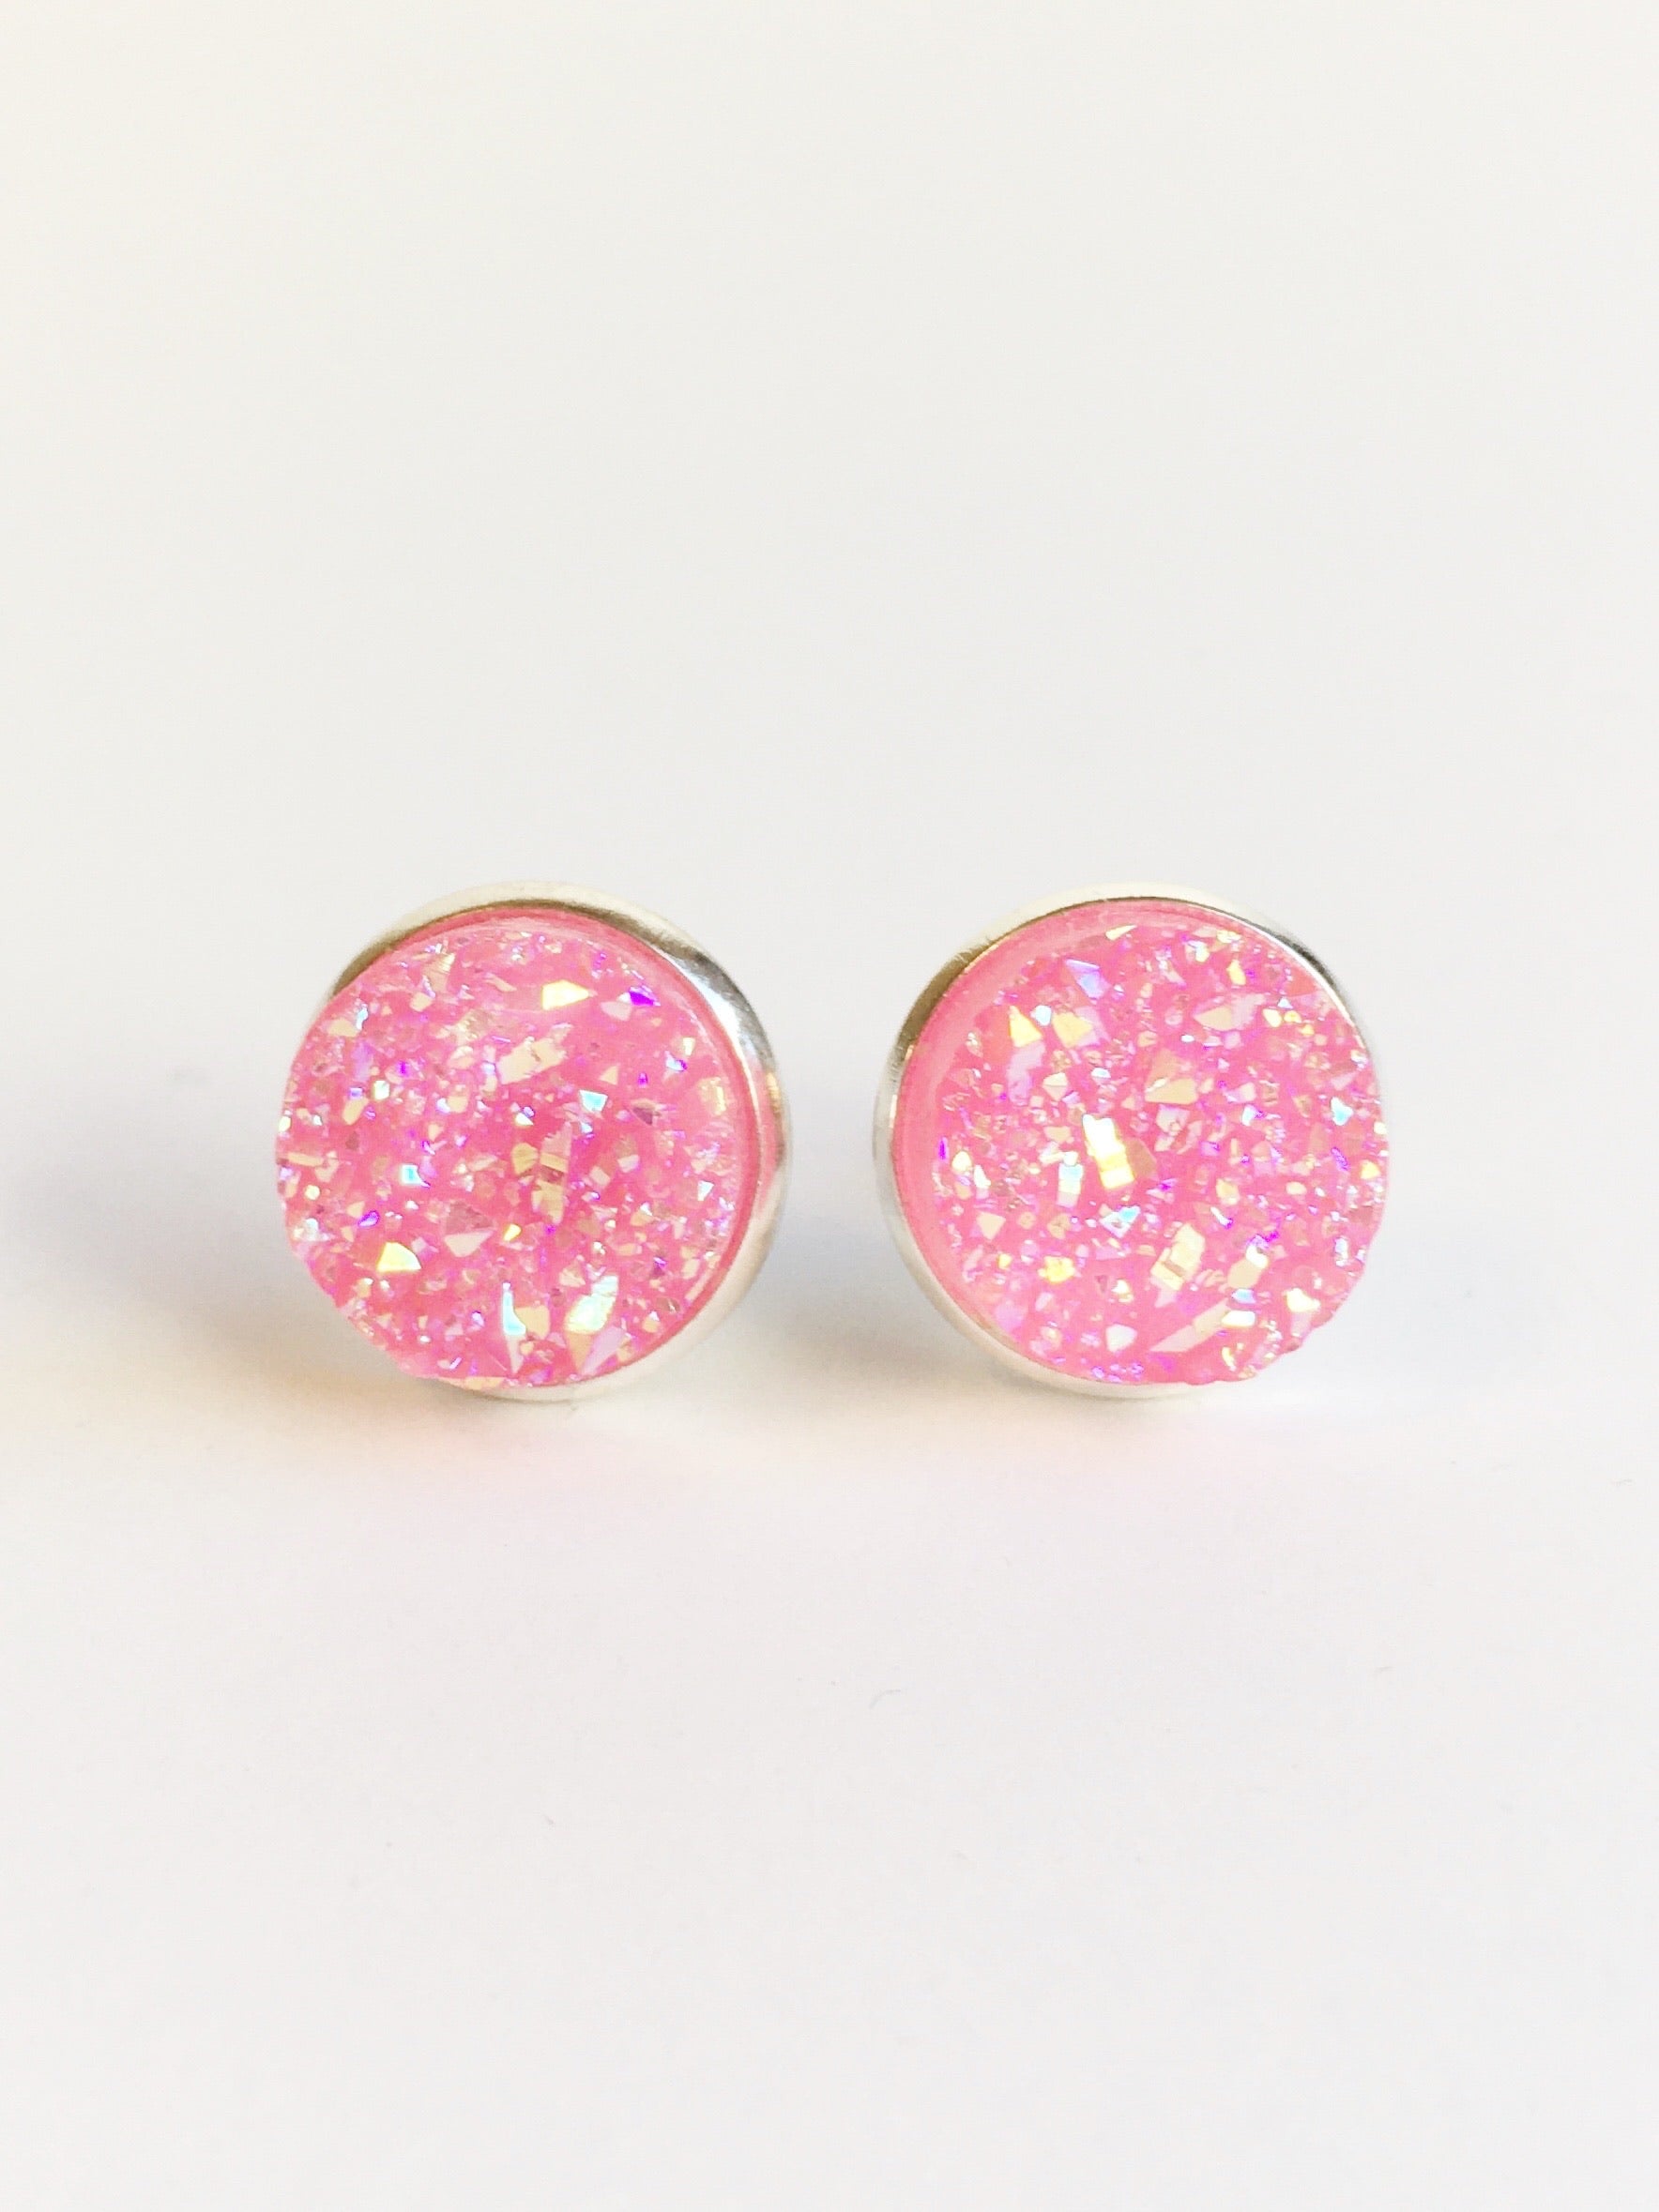 Bright Pink resin druzy stone stud earrings set in a silver color setting. 